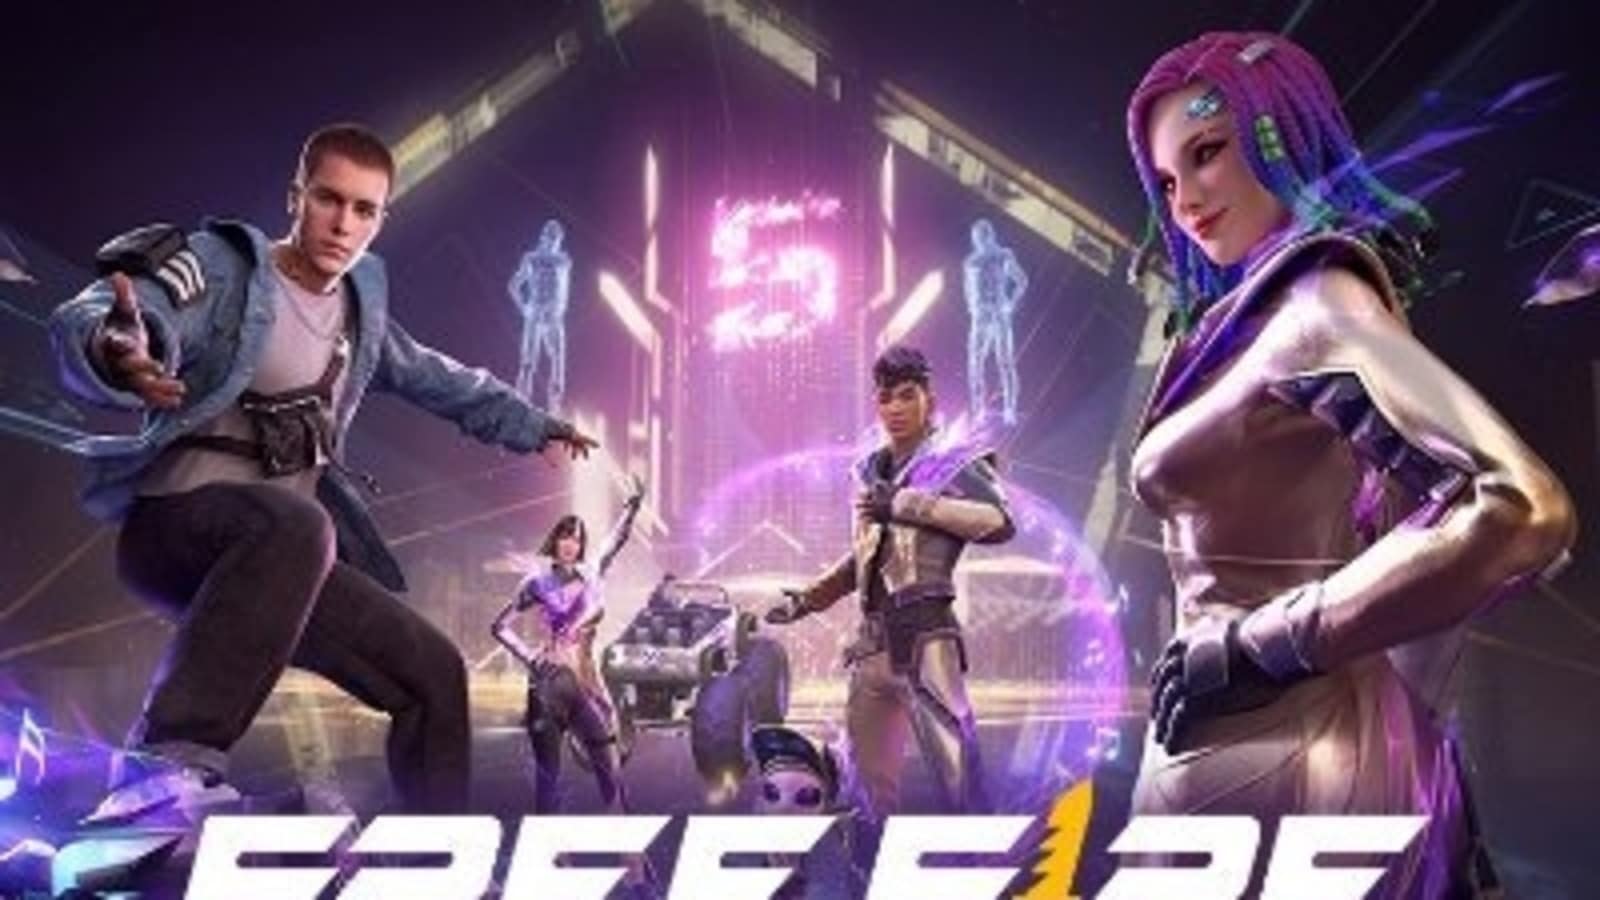 Free Fire Advanced Server: Expected release date for OB41 APK